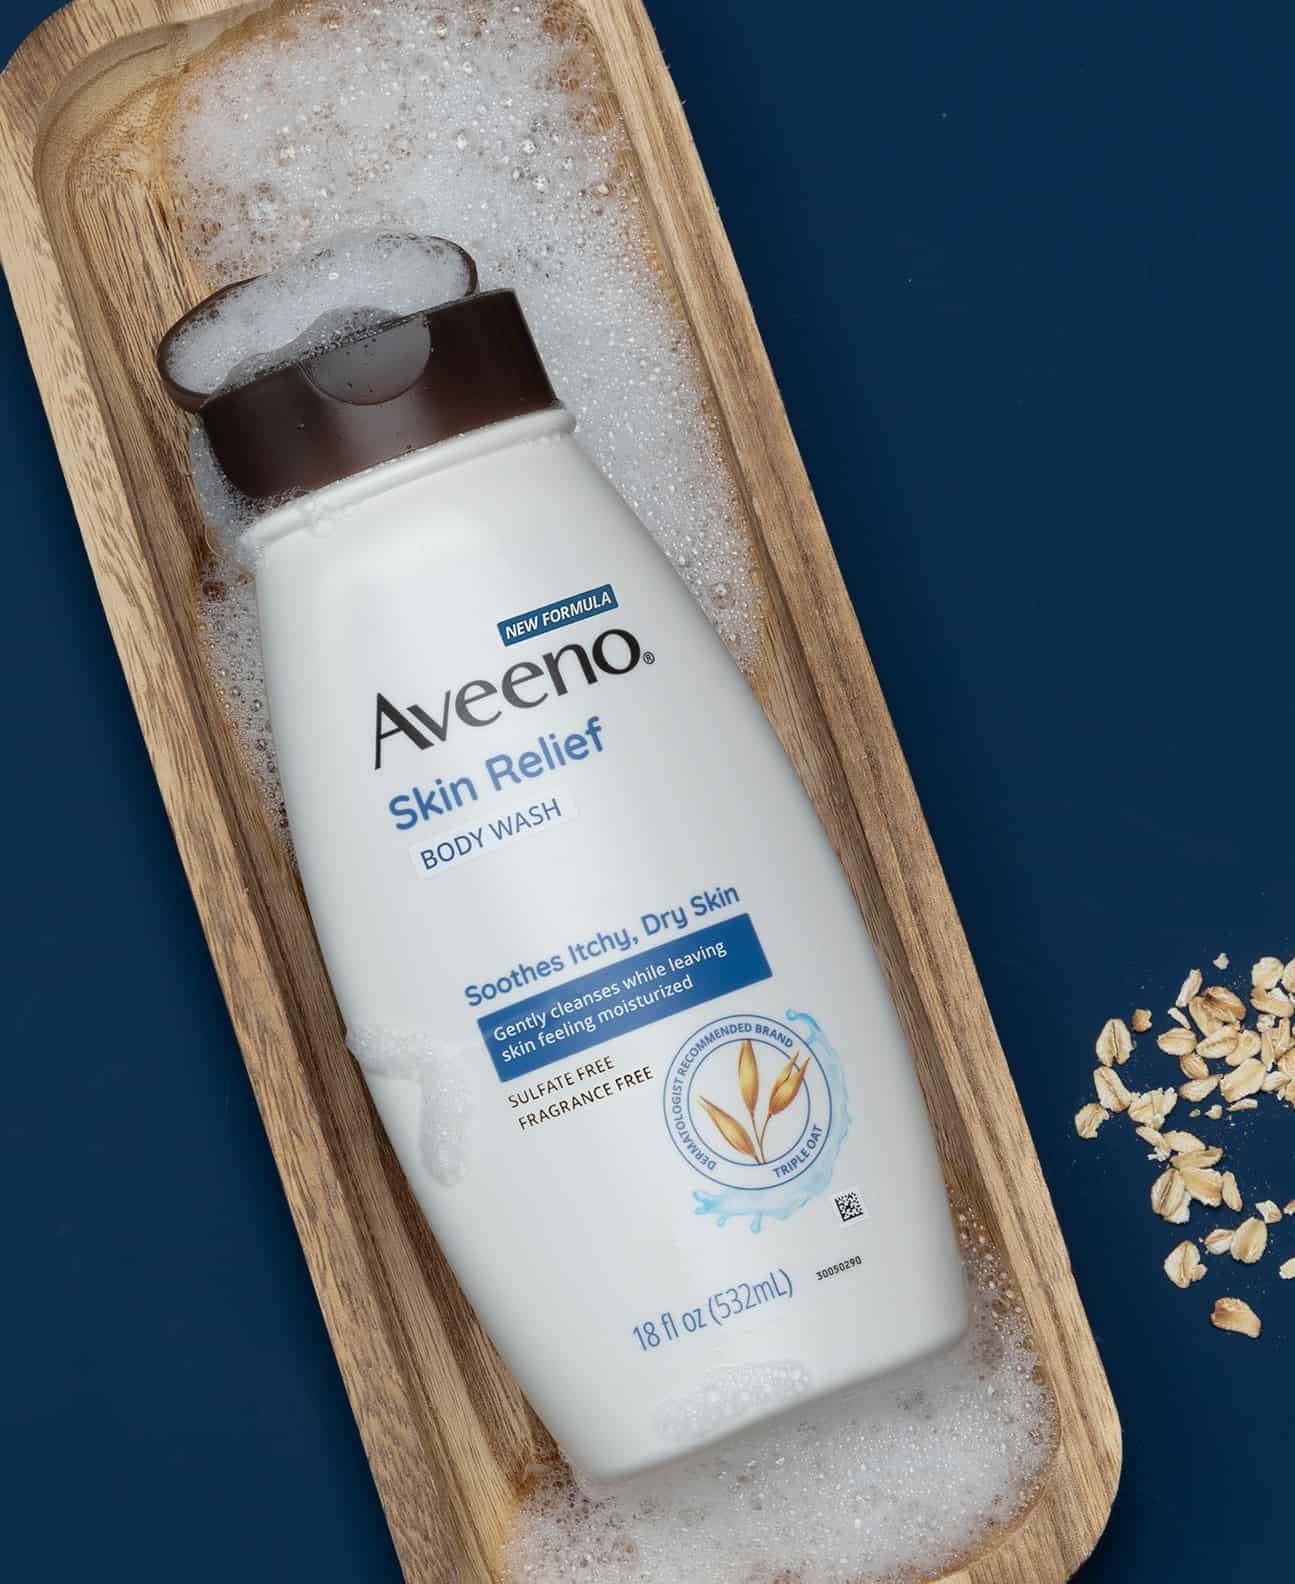 a bottle of skin relief body wash by aveeno on a wooden tray